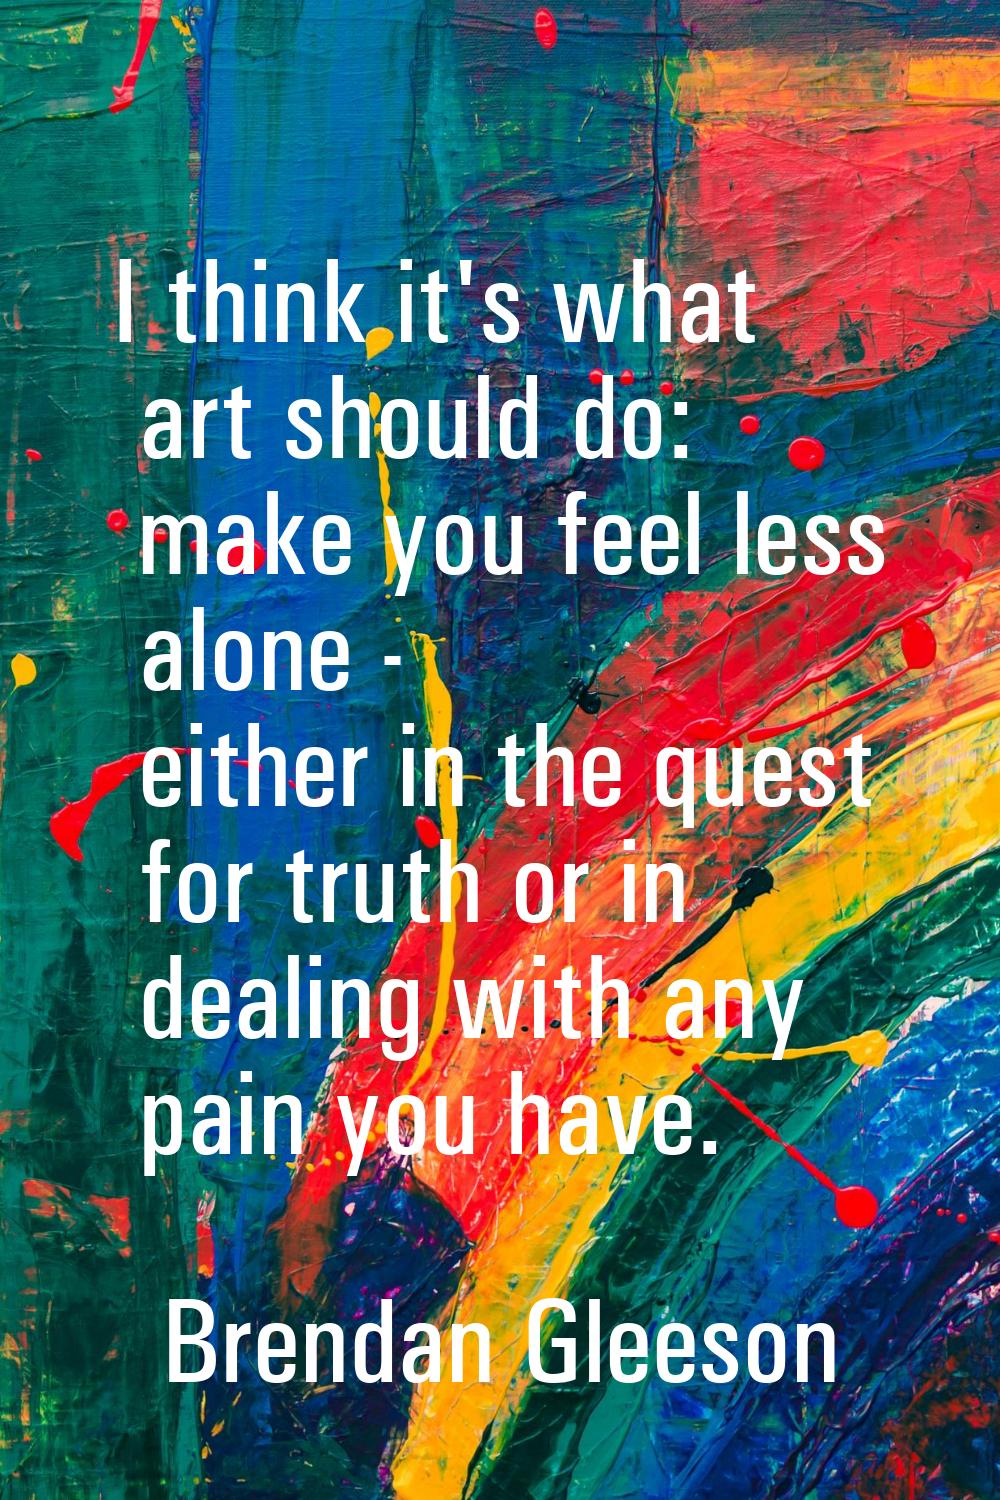 I think it's what art should do: make you feel less alone - either in the quest for truth or in dea